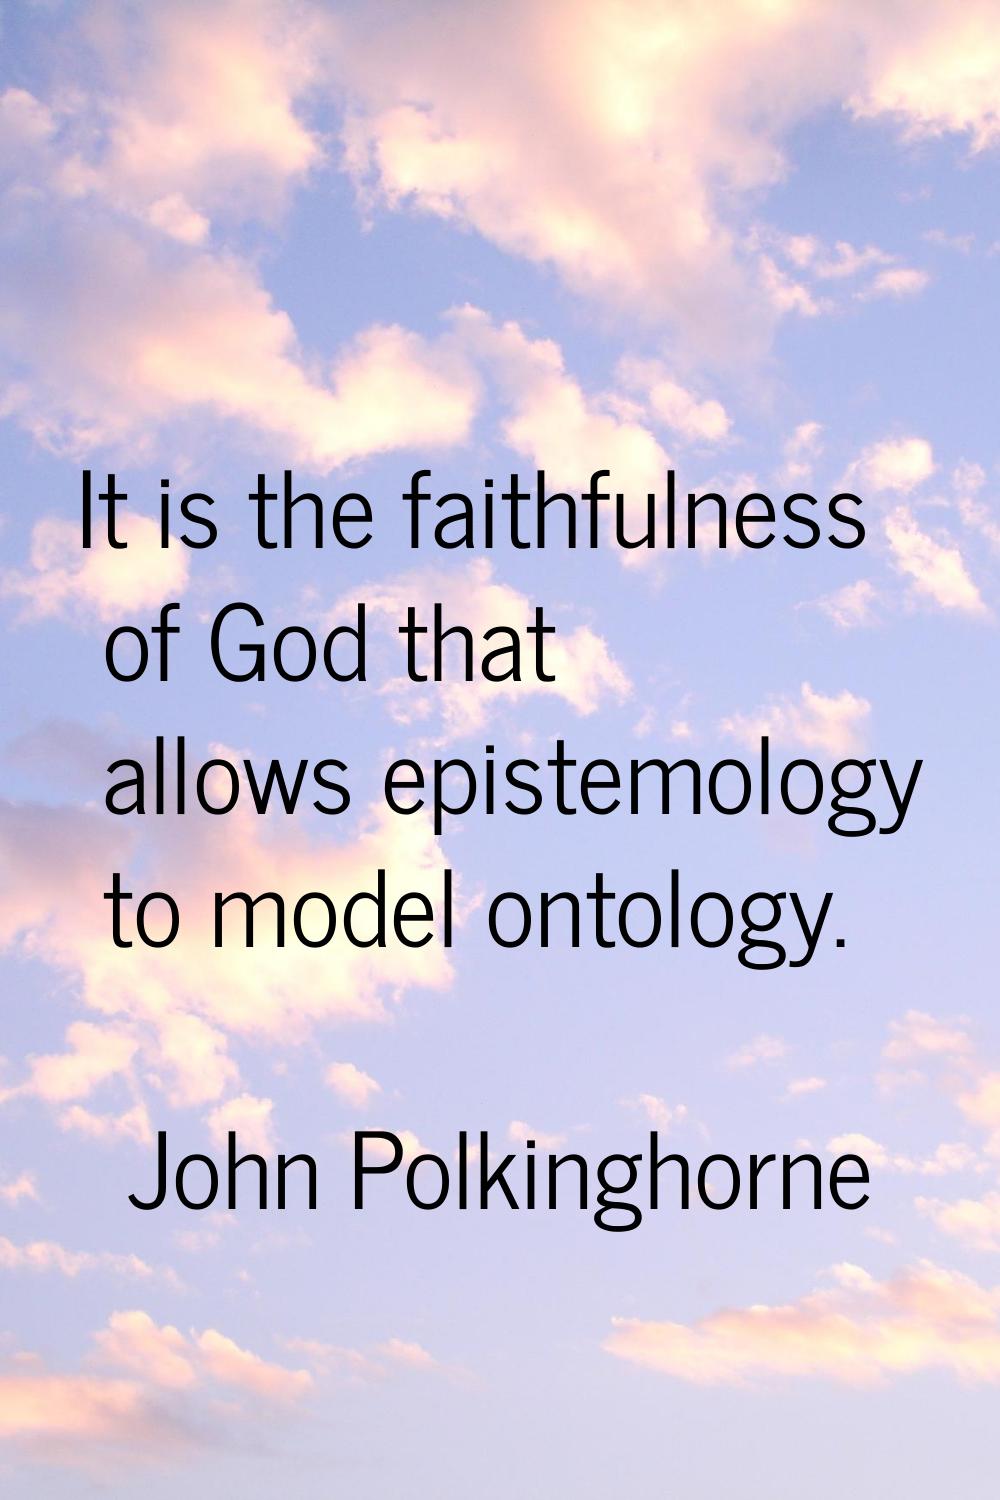 It is the faithfulness of God that allows epistemology to model ontology.